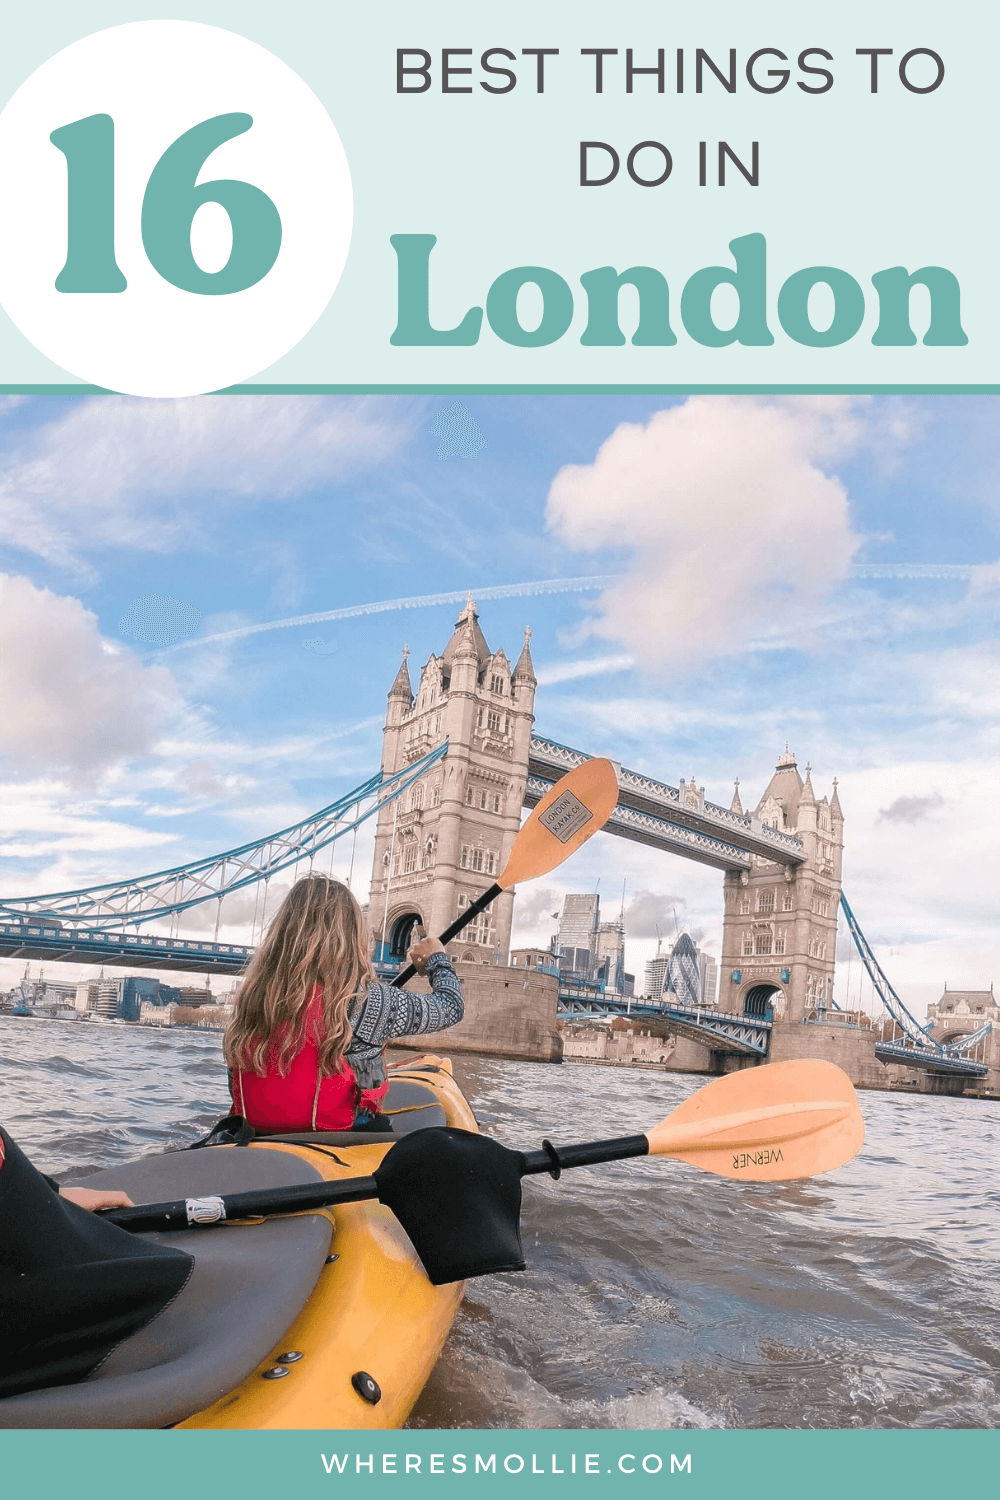 The best things to do in London, England